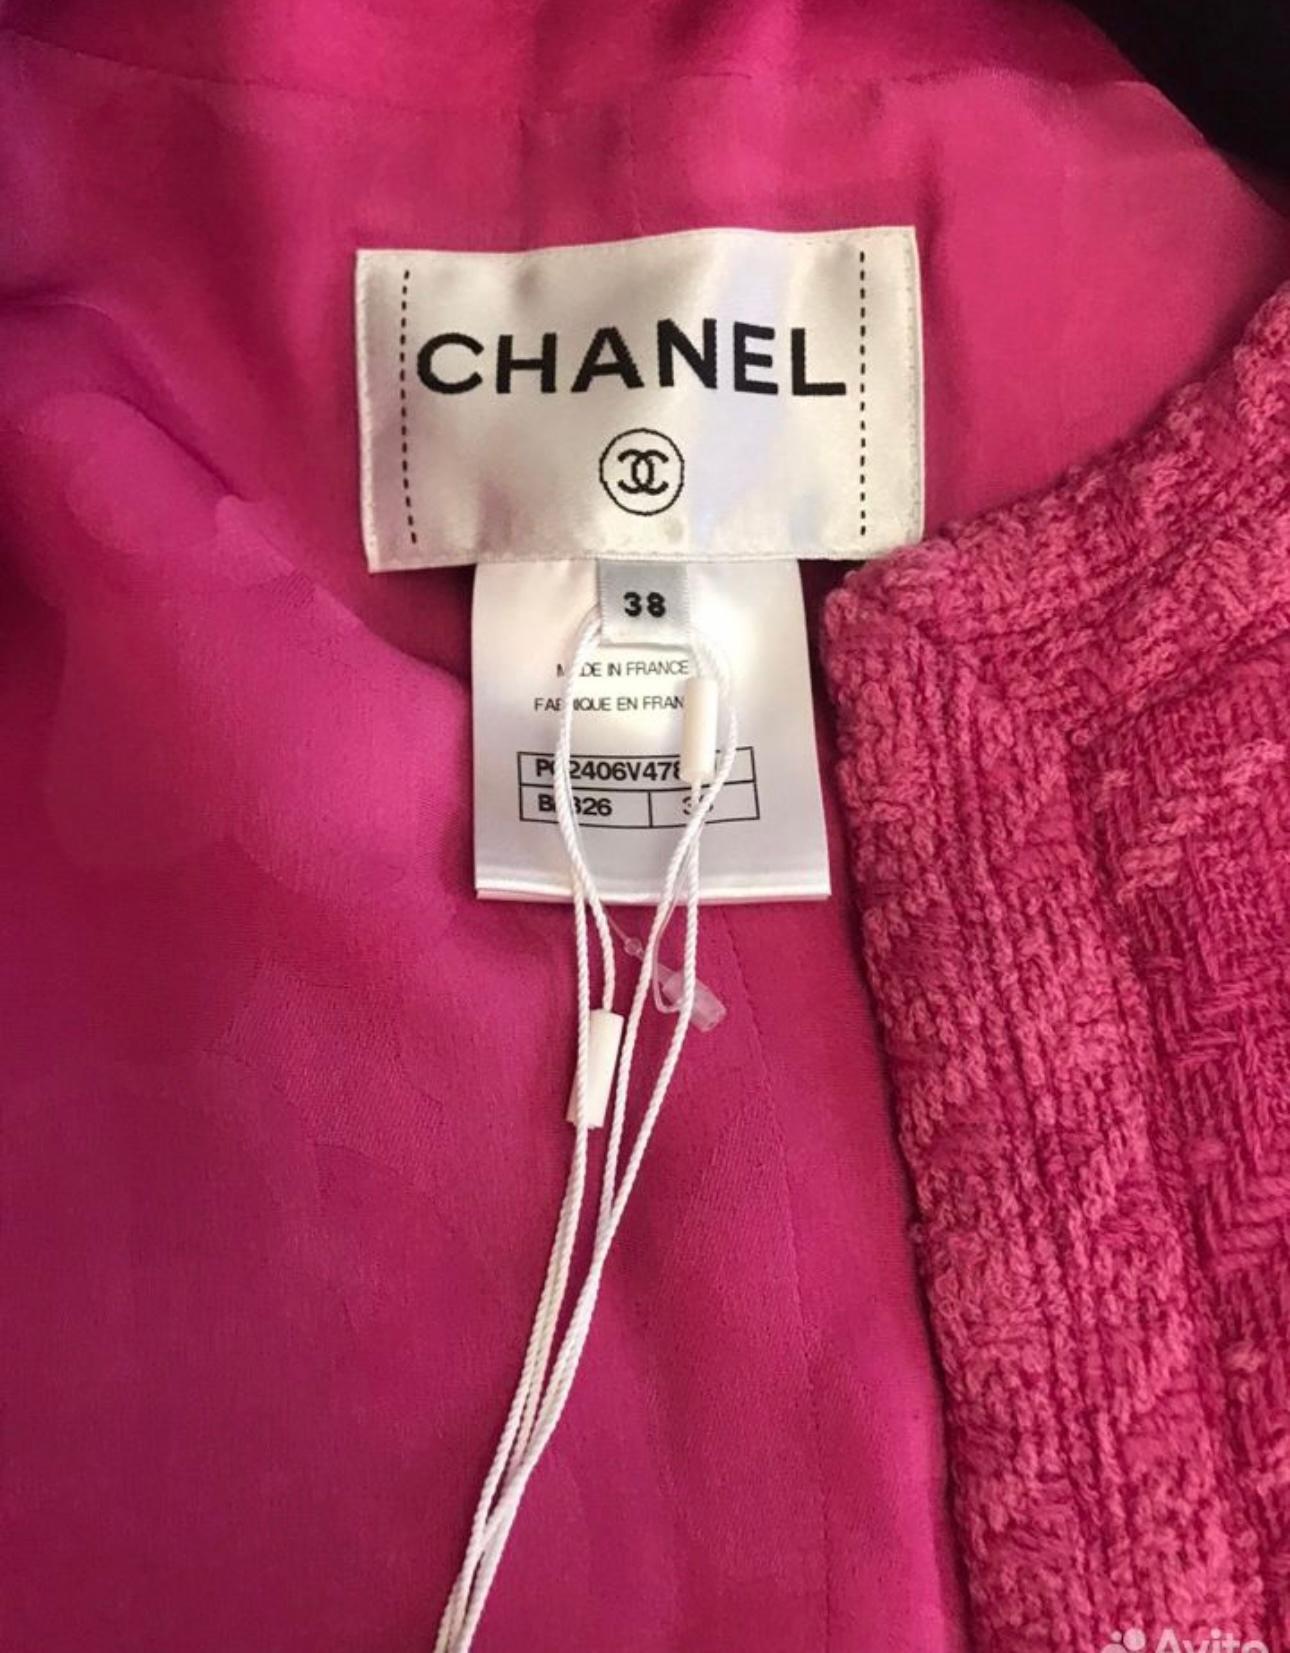 Chanel New Iconic Runway 2019 Fall Tweed Cape Jacket For Sale 8